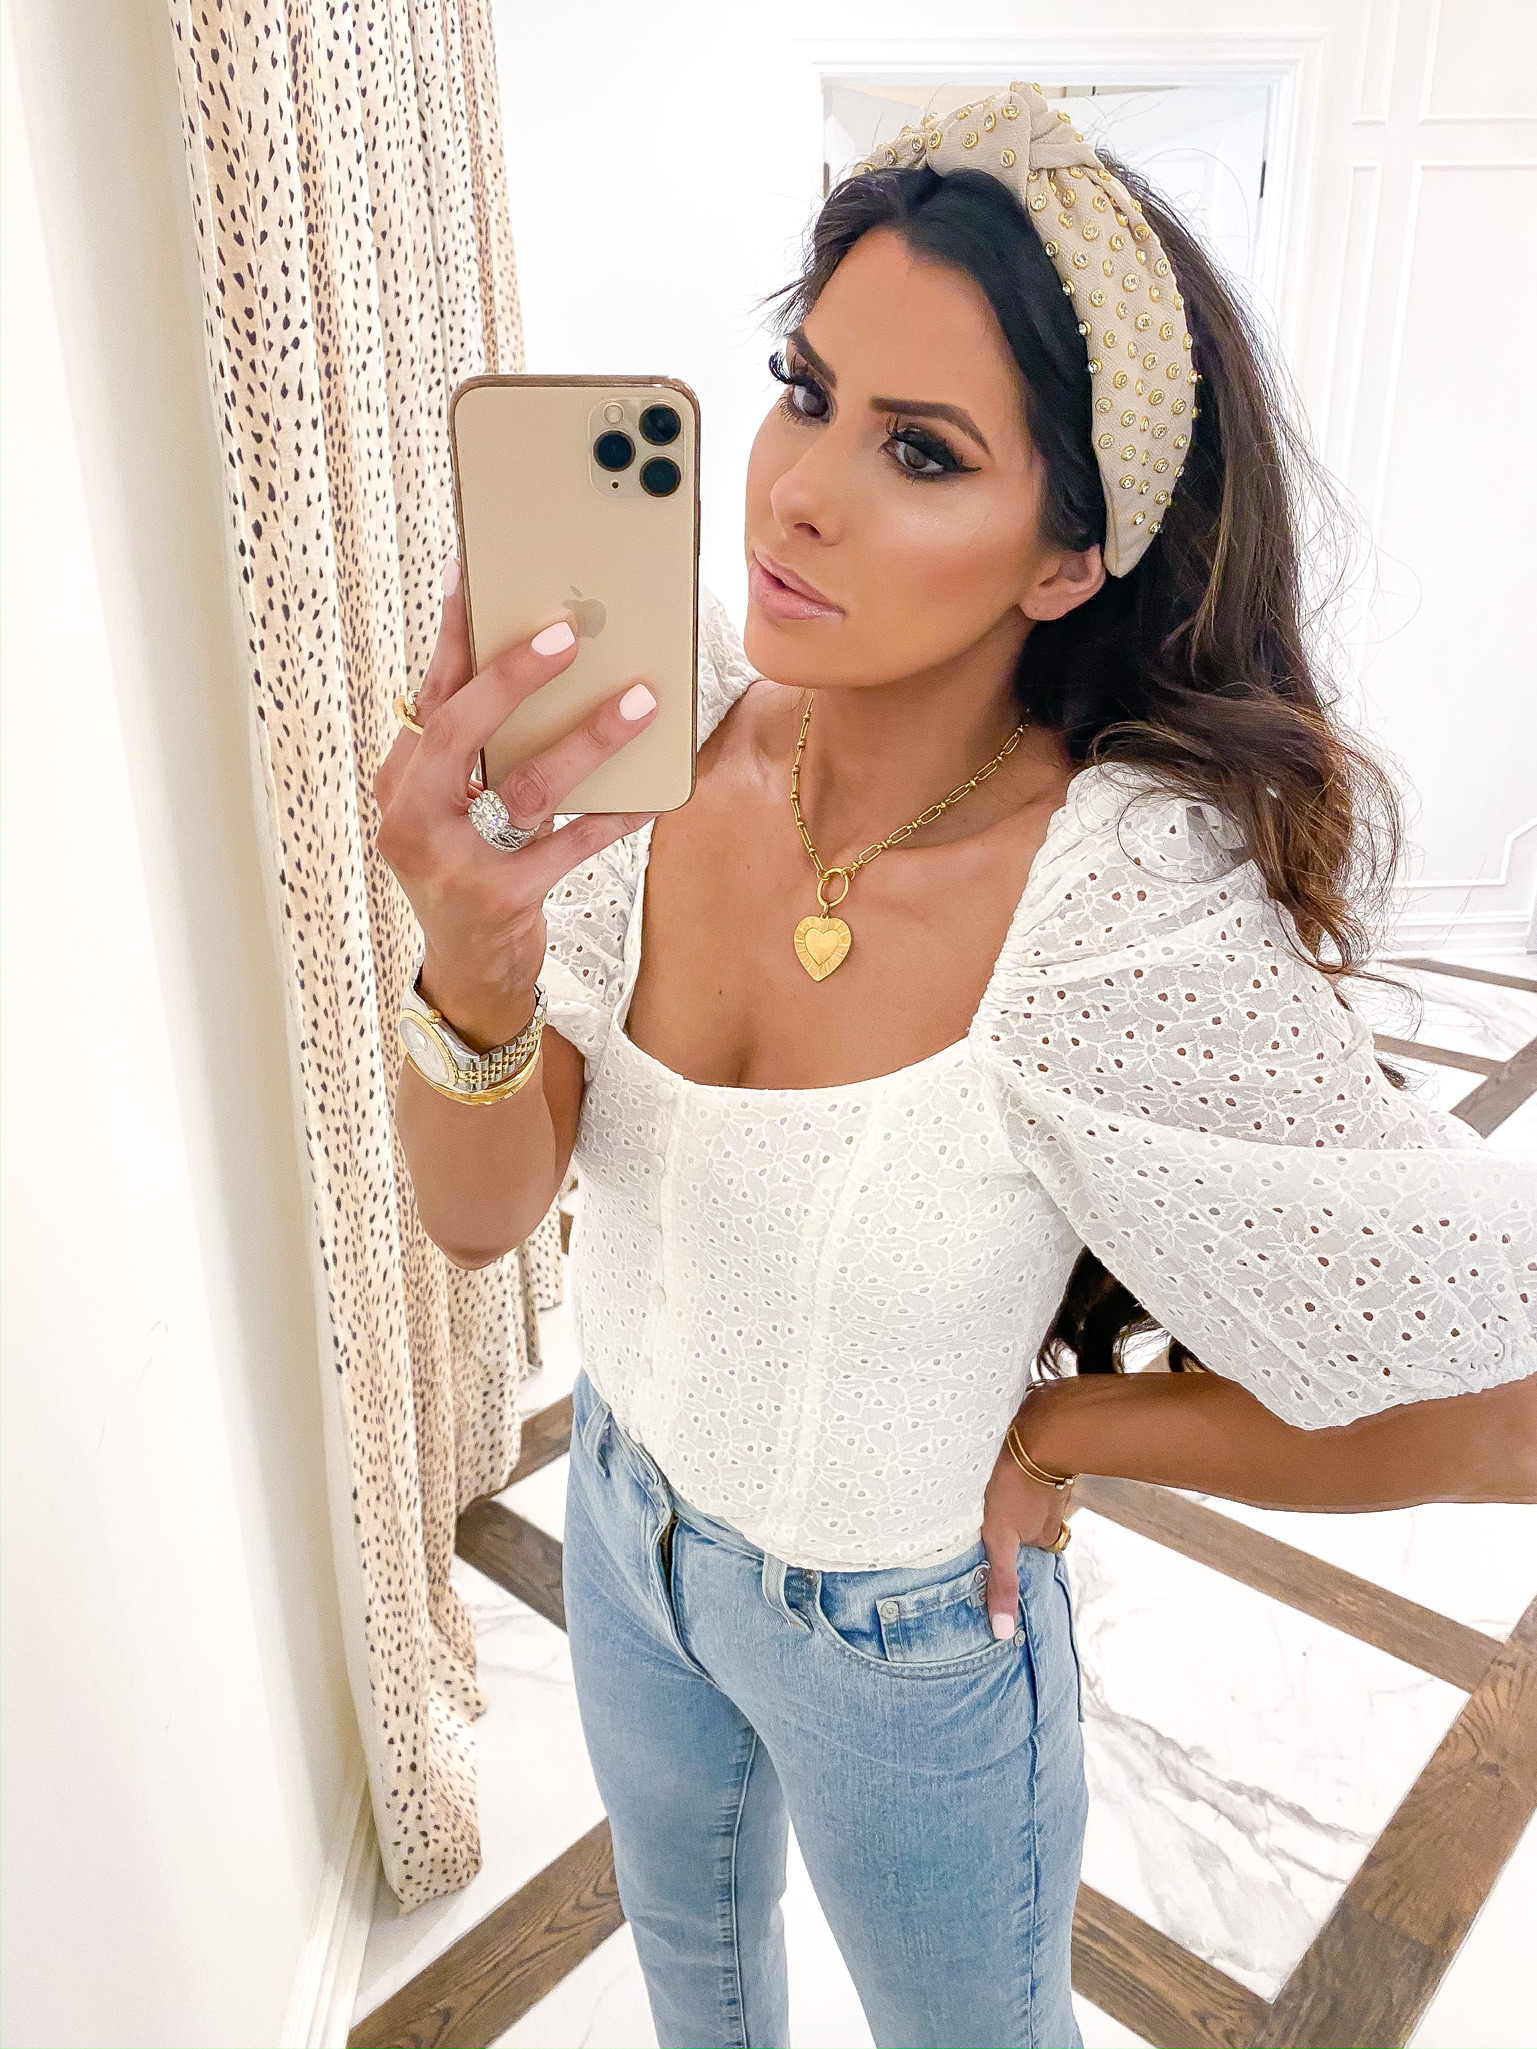 Spring Trends 2020 by popular US fashion blog, The Sweetest Thing: image of a woman wearing a BUDDYLOVE DEMI SWEETHEART TOP, Nordstrom The Isabelle High Waist Step Hem Ankle Jeans AG, ShopBop Brinker & Eliza The Best Is Yet To Come Necklace, and Nordstrom Crystal Embellished Headband LELE SADOUGHI.